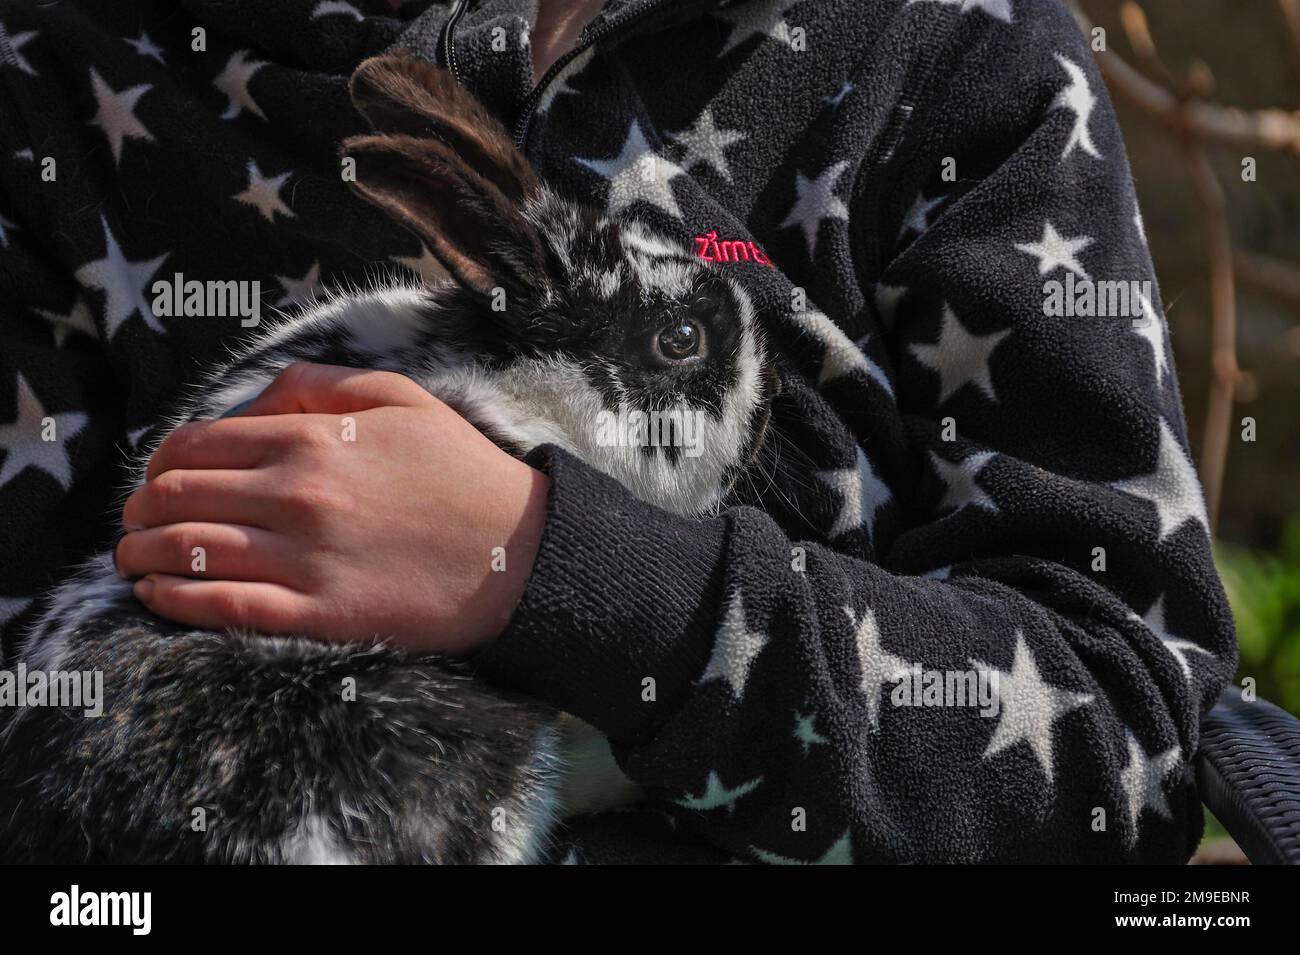 Child's hand holding black and white hare on black and white jacket, Ringsheim, Baden-Wuerttemberg, Germany Stock Photo